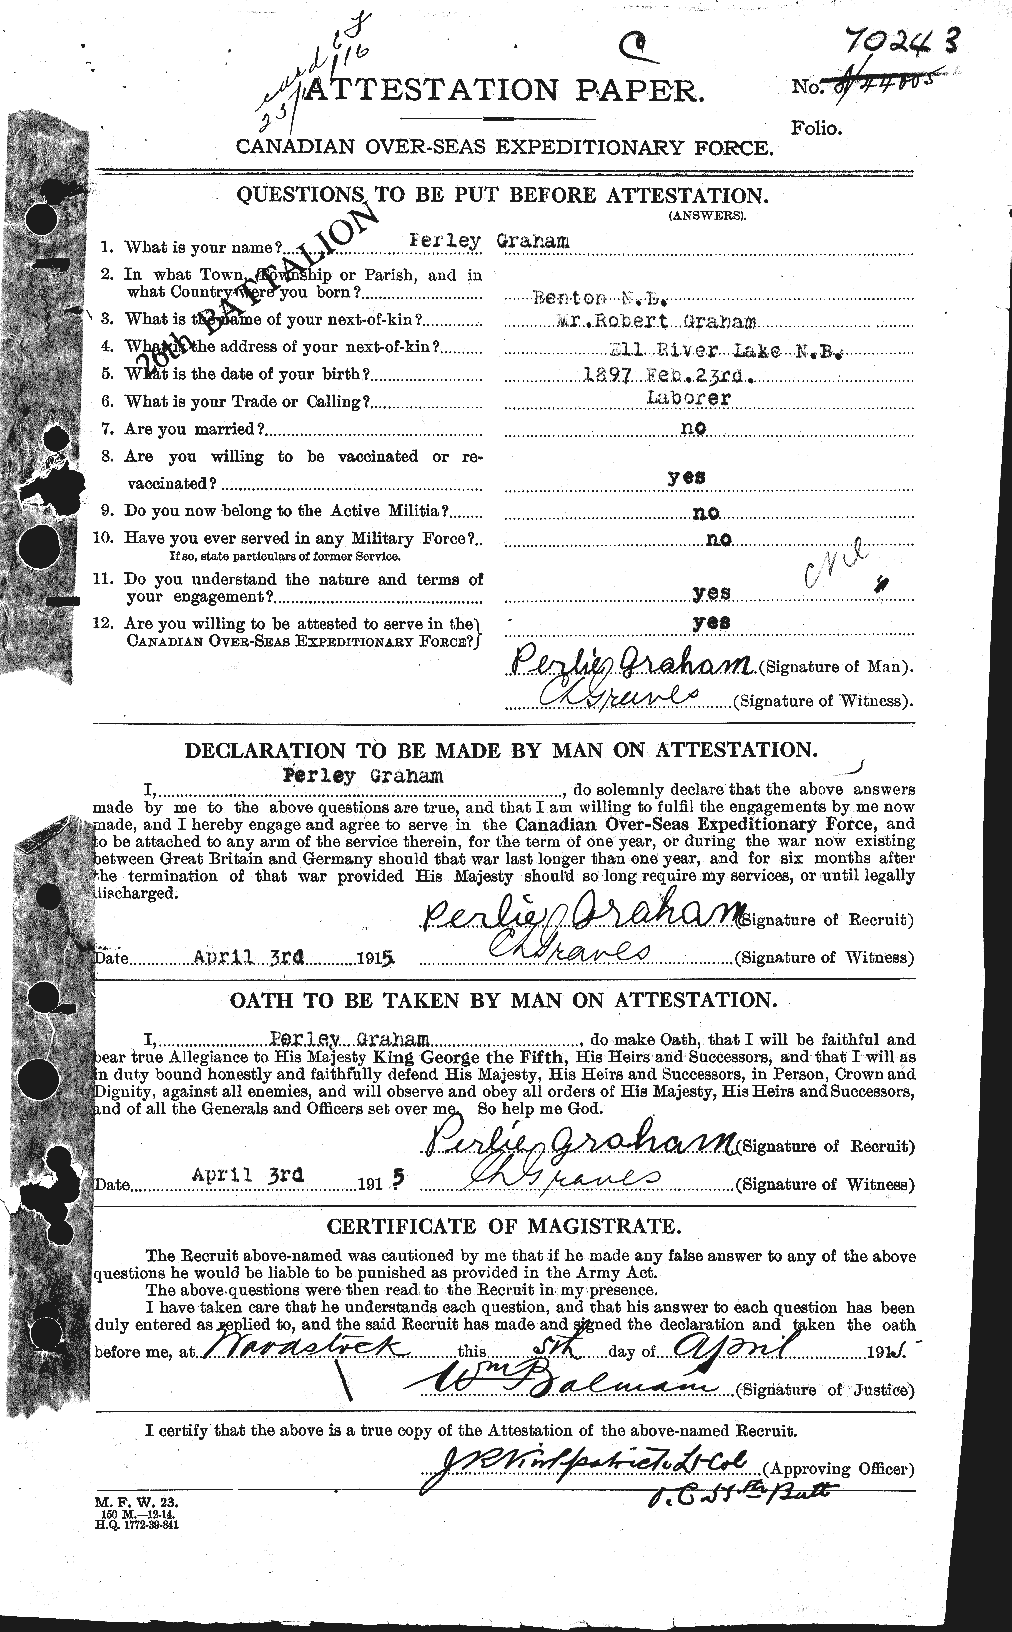 Personnel Records of the First World War - CEF 359343a